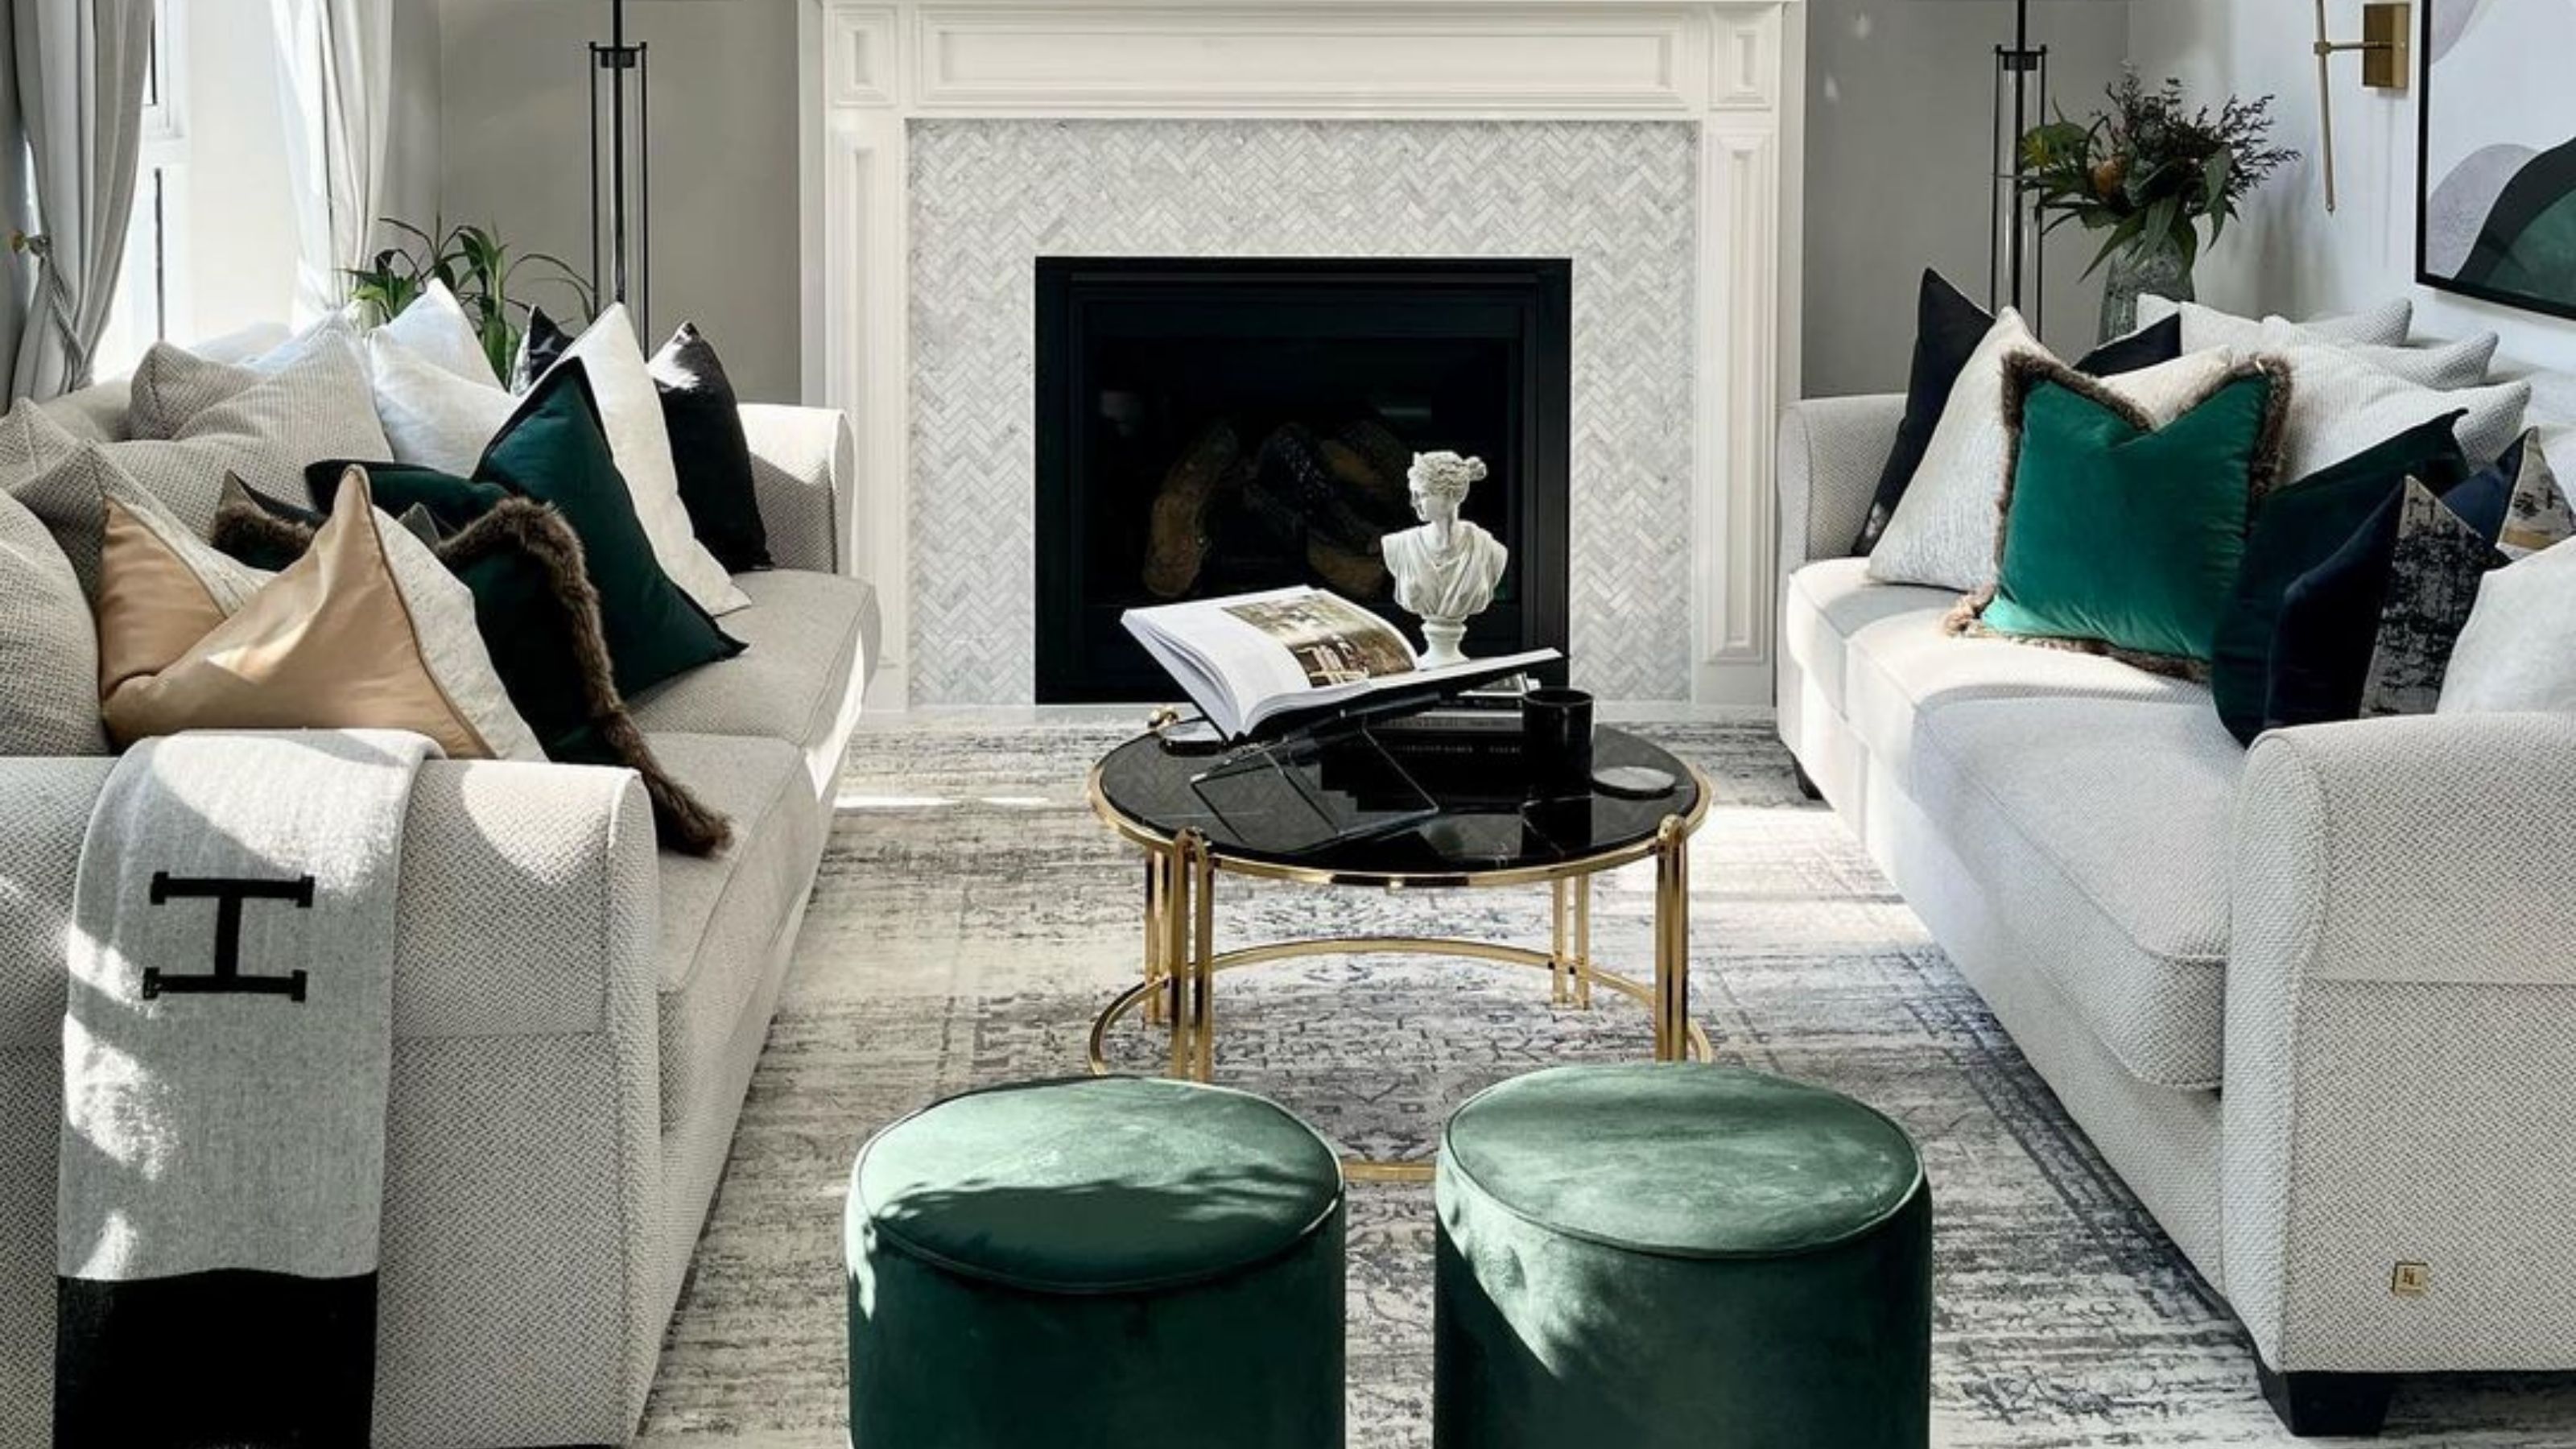 The simple way glamorous influencers make their homes look ultra-luxe